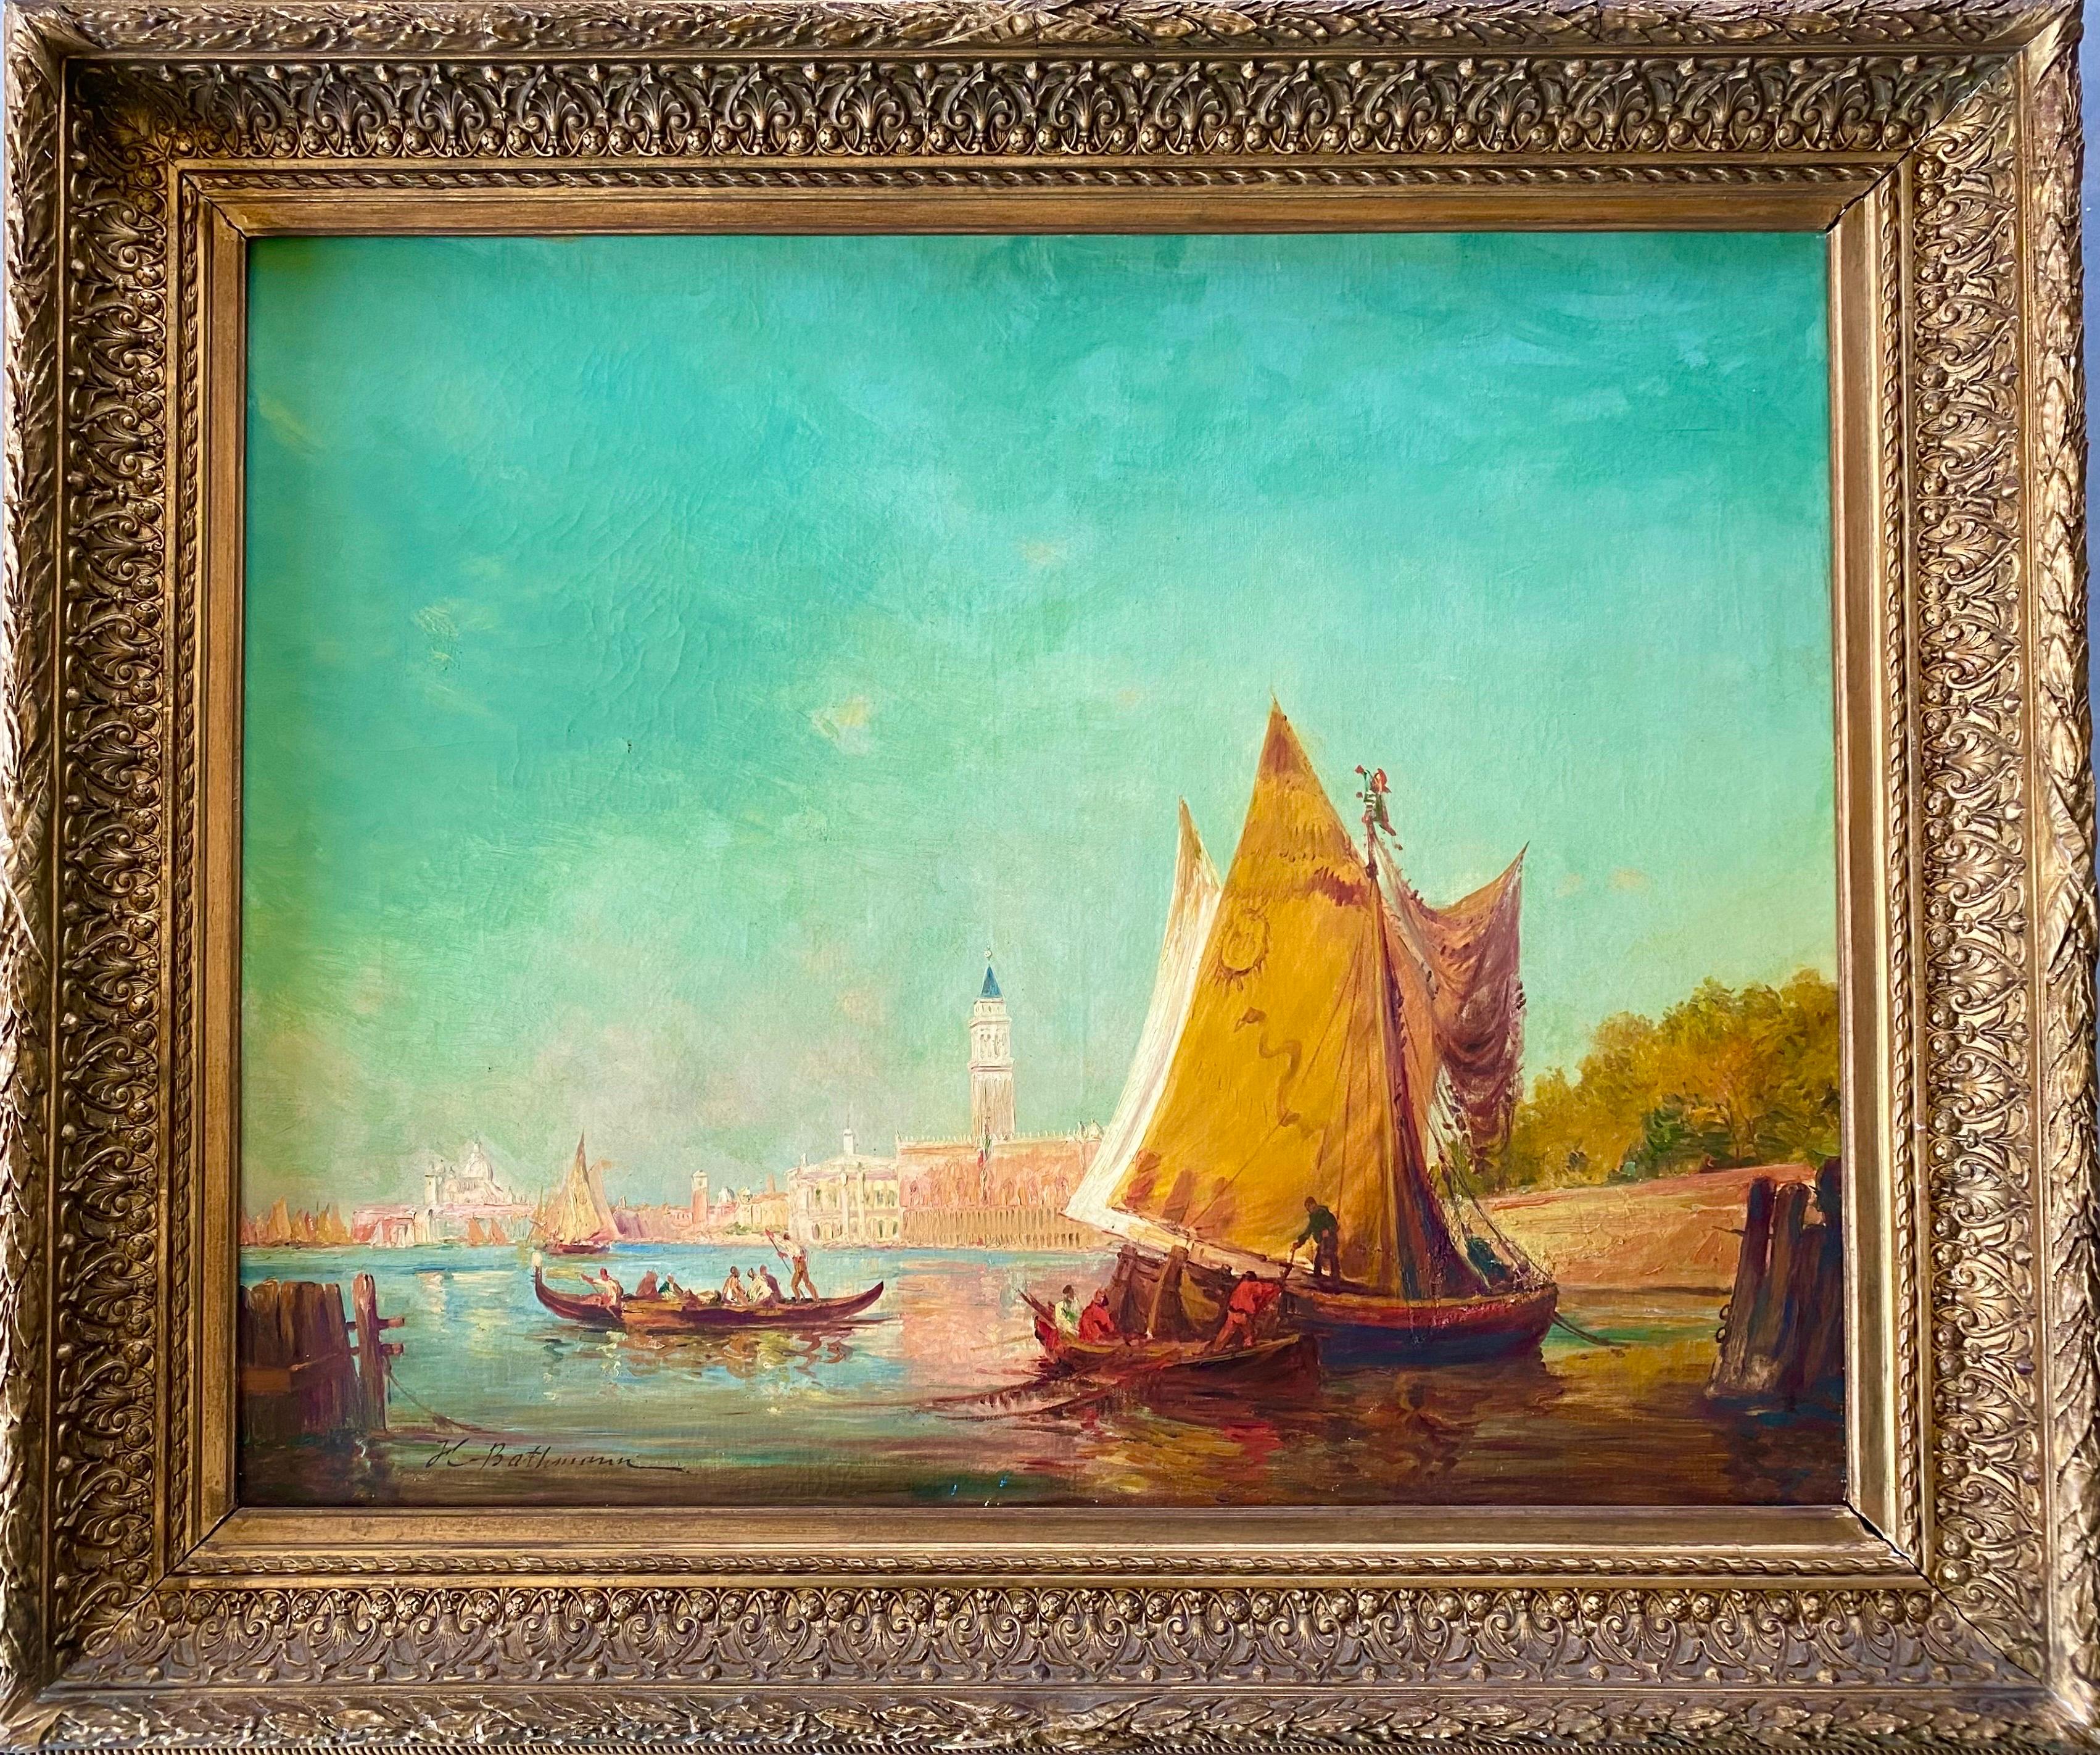 Unknown Figurative Painting - Huge 19th century French impressionist painting - Venice - Cityscape